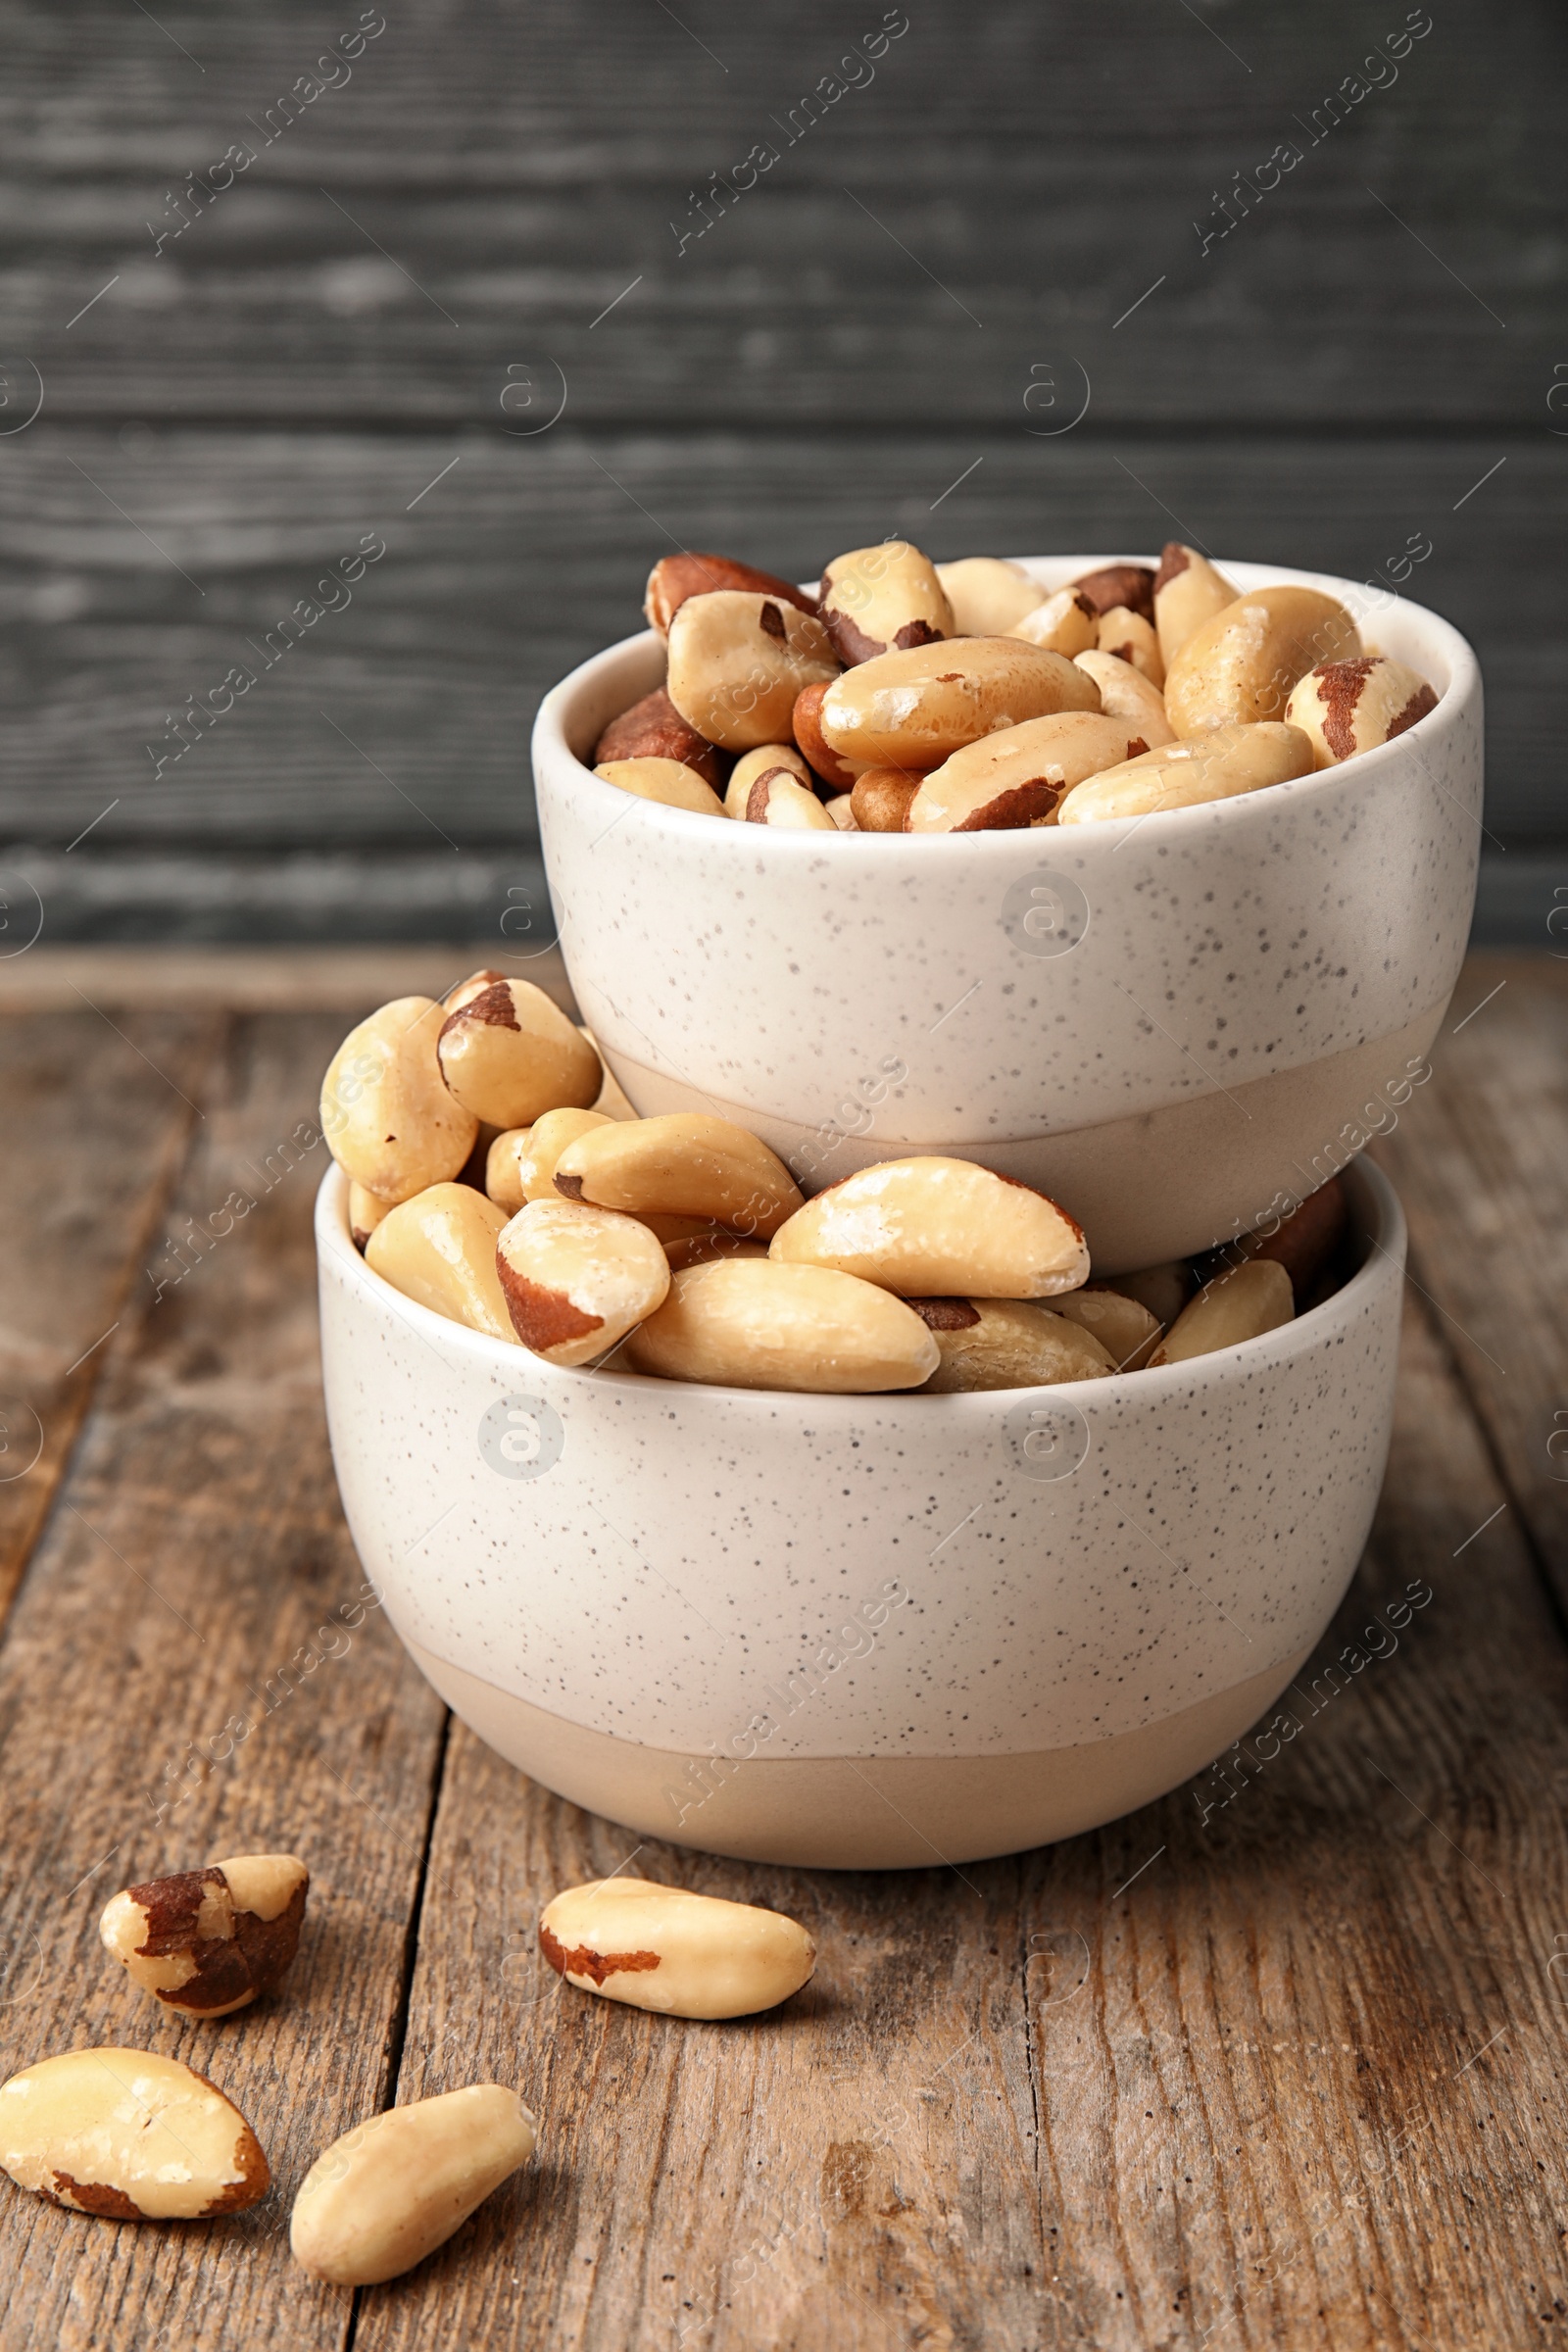 Photo of Bowls with tasty Brazil nuts on wooden table